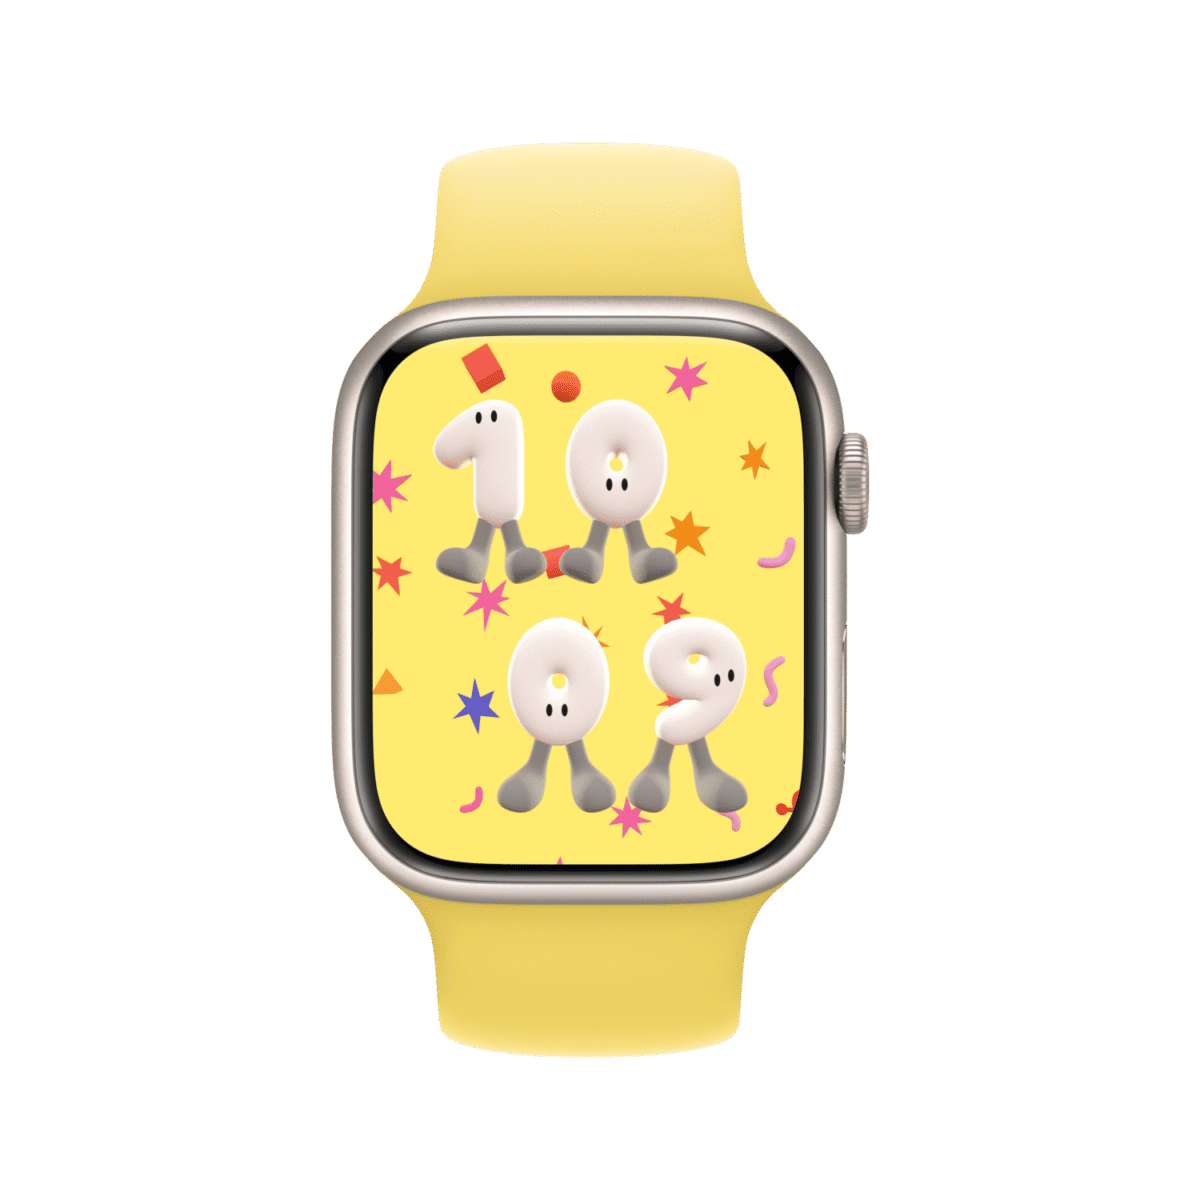 Apple WWDC22 watchOS 9 Playtime face 220606